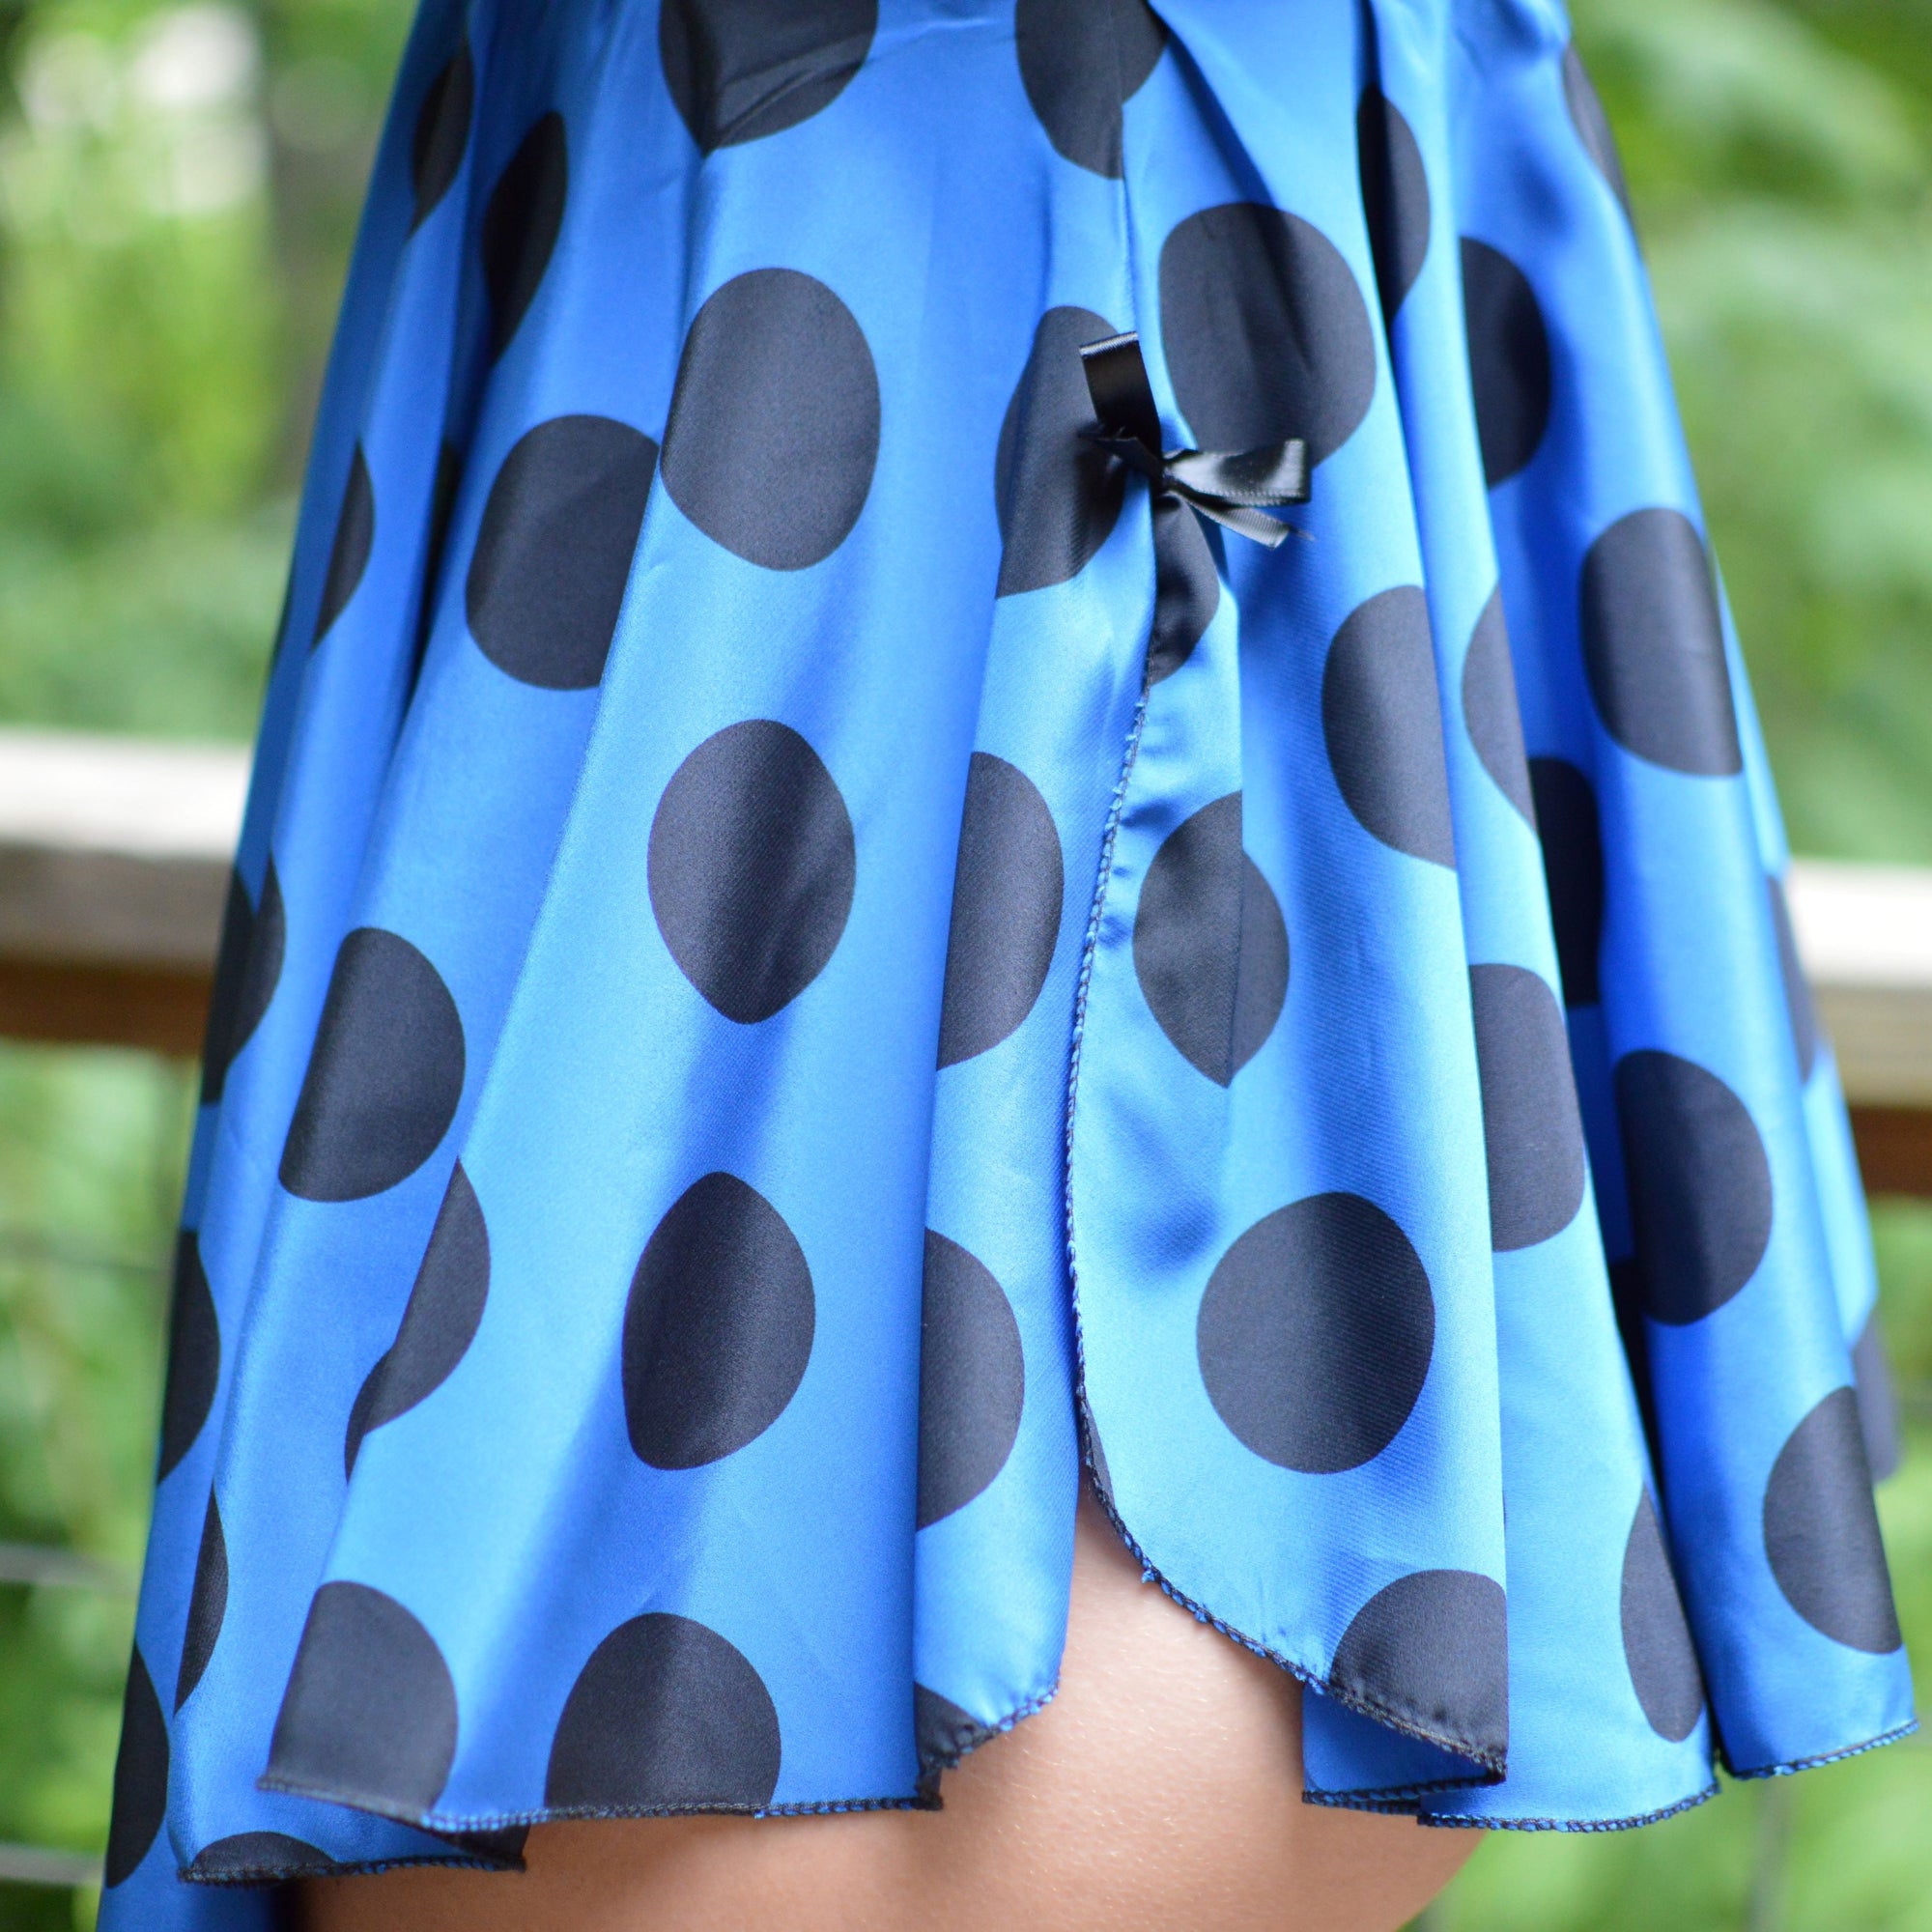 Young woman standing outside with her back to the camera, wearing a blue lingerie top with black polka dots and black straps.